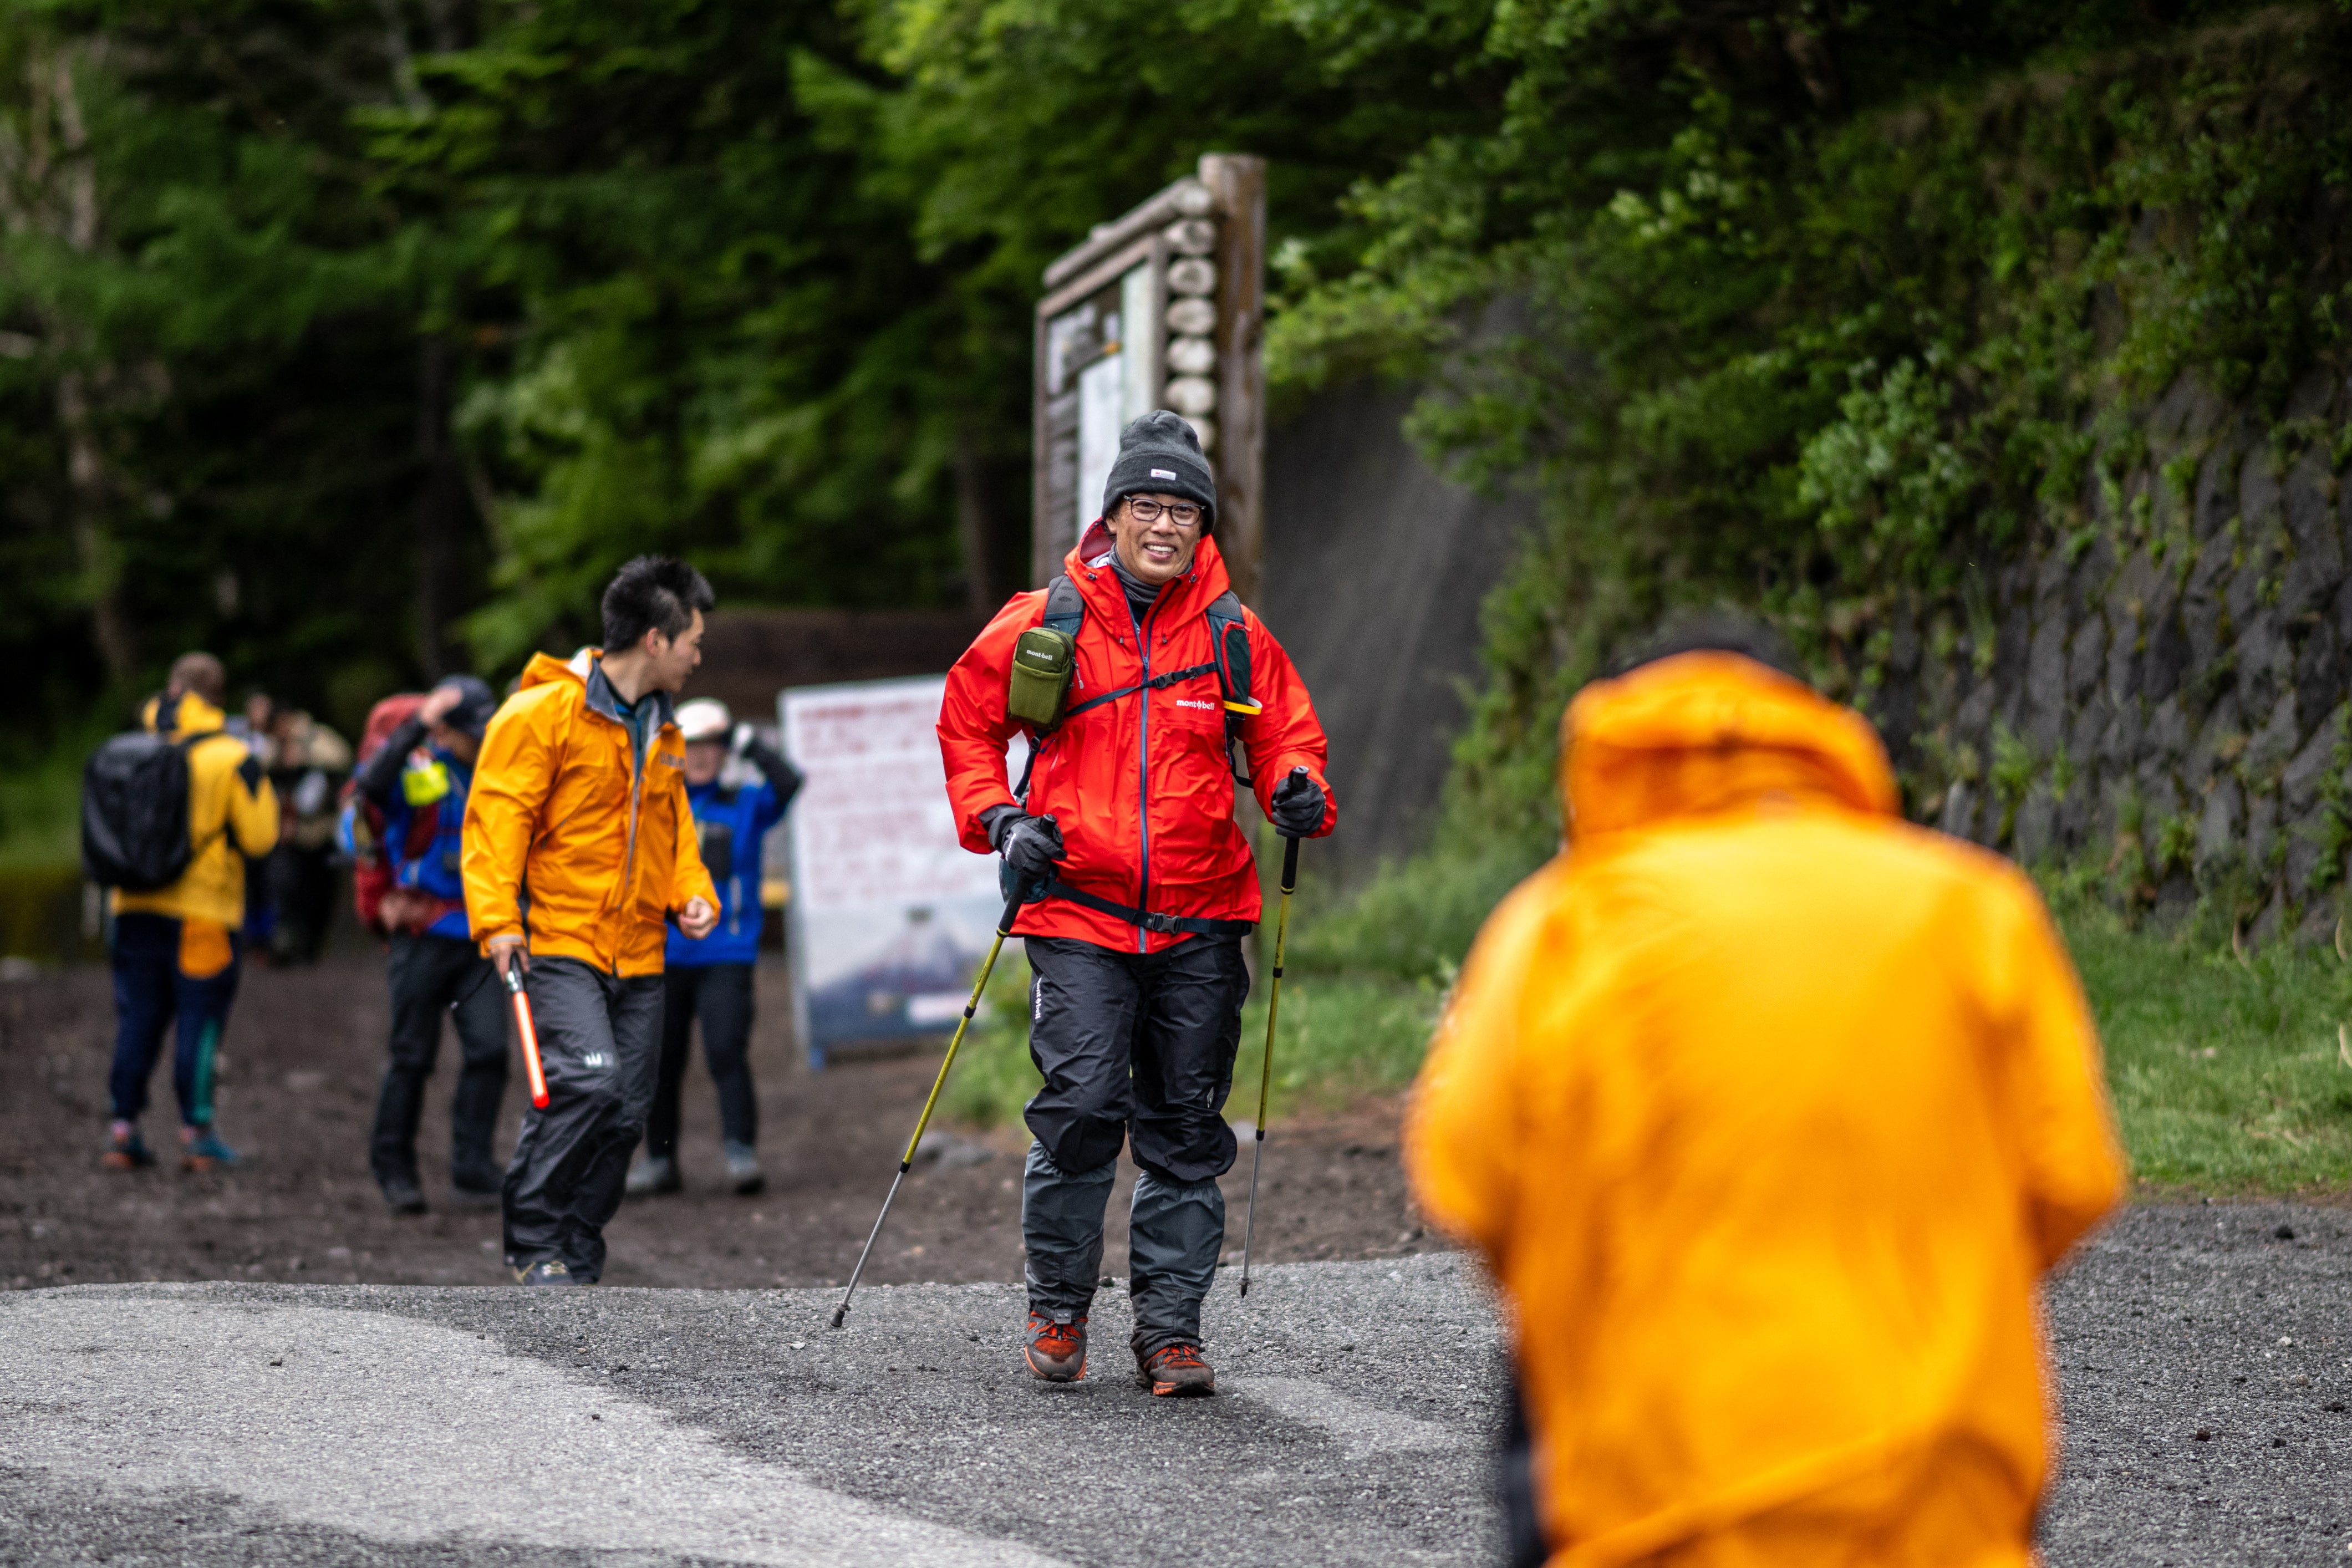 Hikers walk out from the newly installed gate at Fuji Subaru Line 5th station on their way to Mount Fuji on the first day of the new climbing season at Narusawa in Yamanashi prefecture